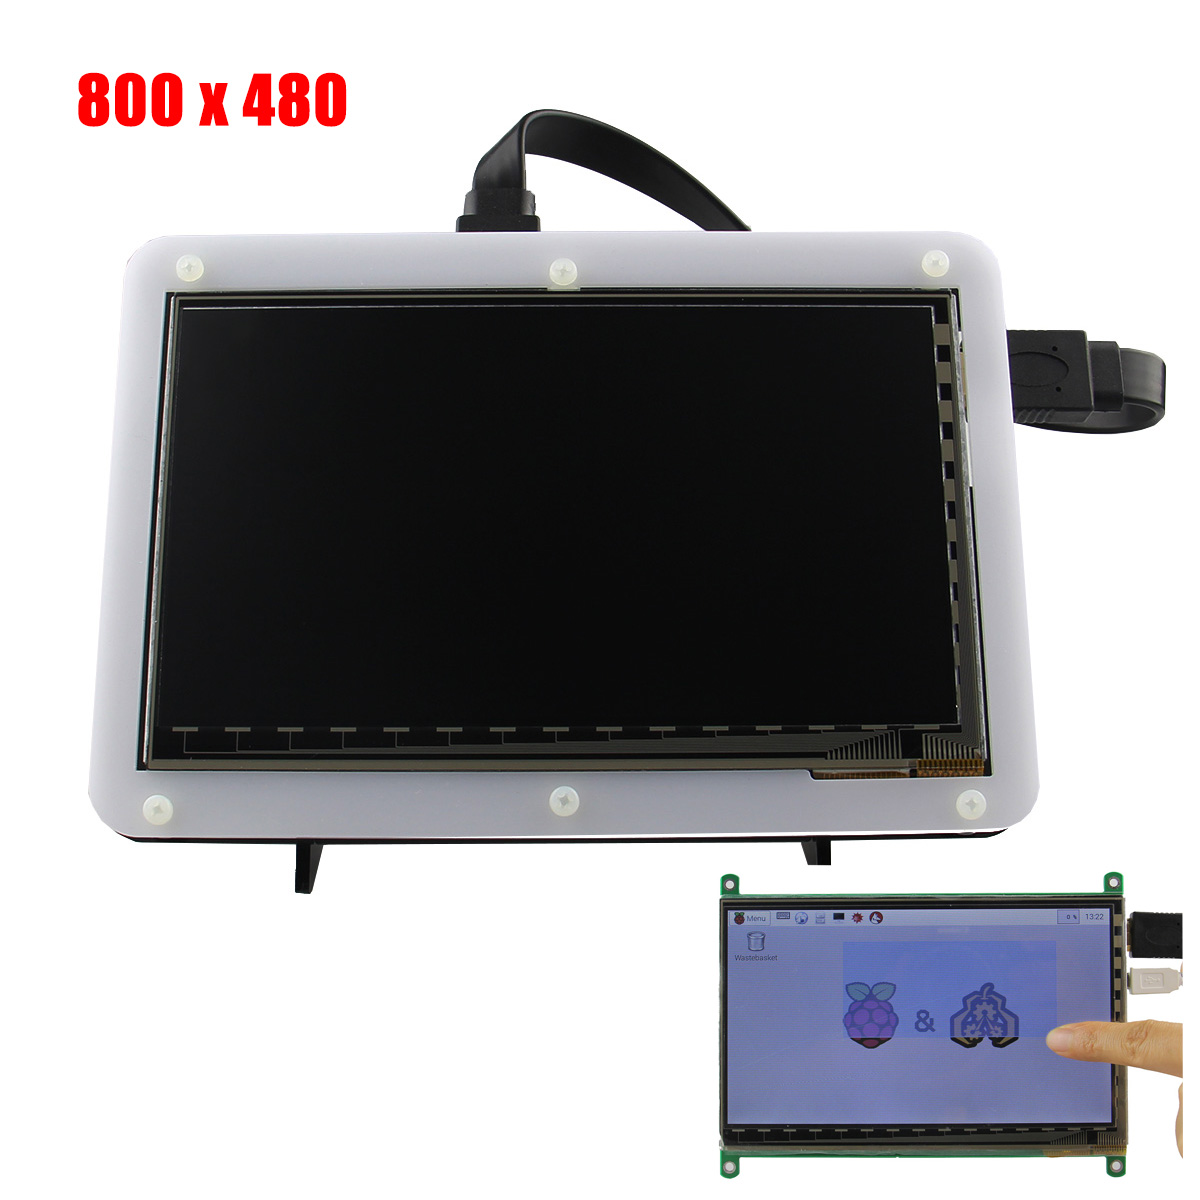 7-Inch-800x480-TFT-LCD-HD-Capacitive-Touch-Display-With-Acrylic-Stander-Bracket-For-Raspberry-Pi-3B2-1042844